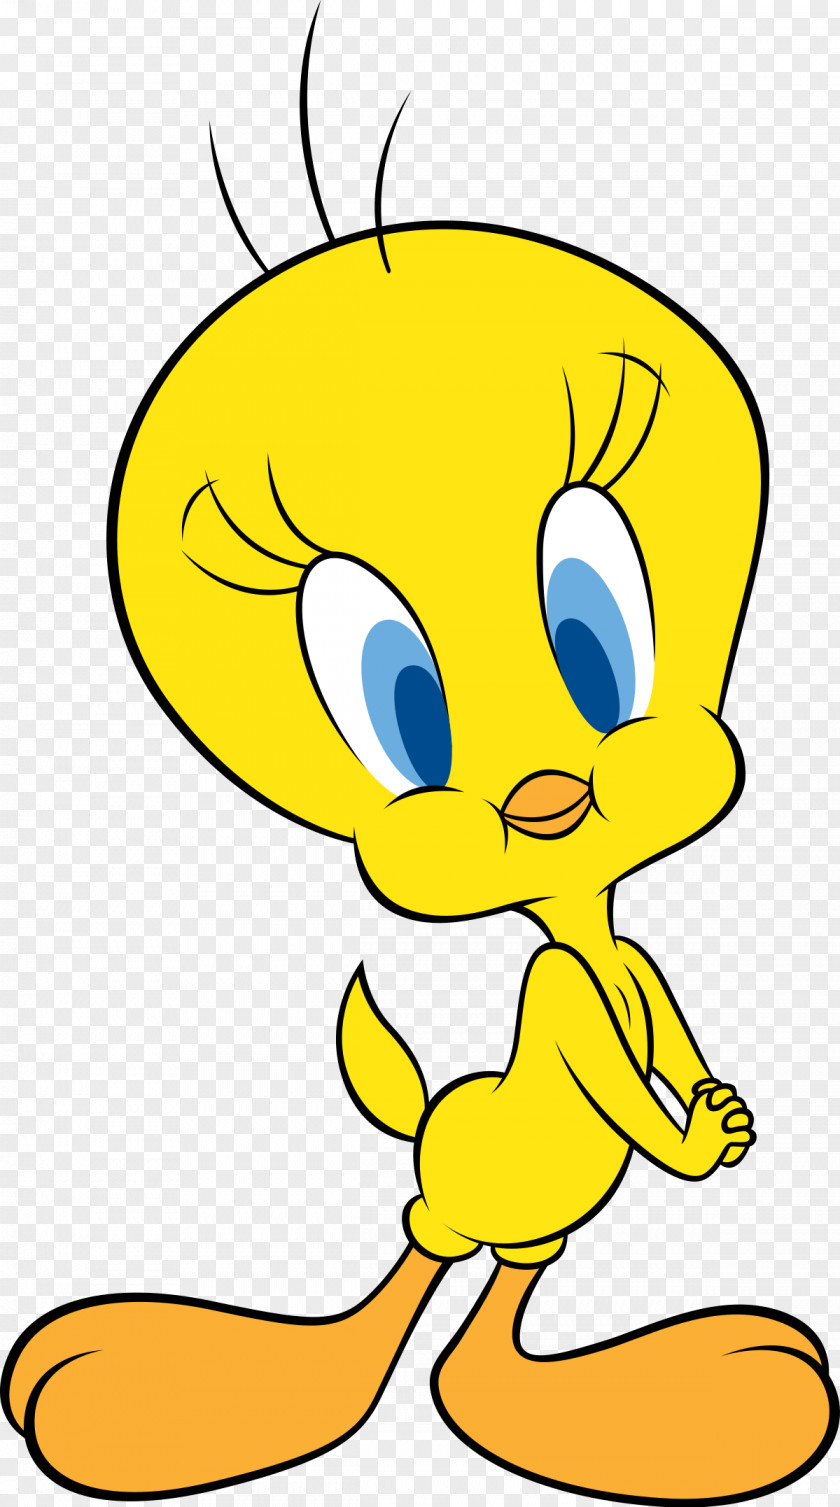 Jerry Can Tweety Sylvester Looney Tunes Elmer Fudd Cartoon PNG